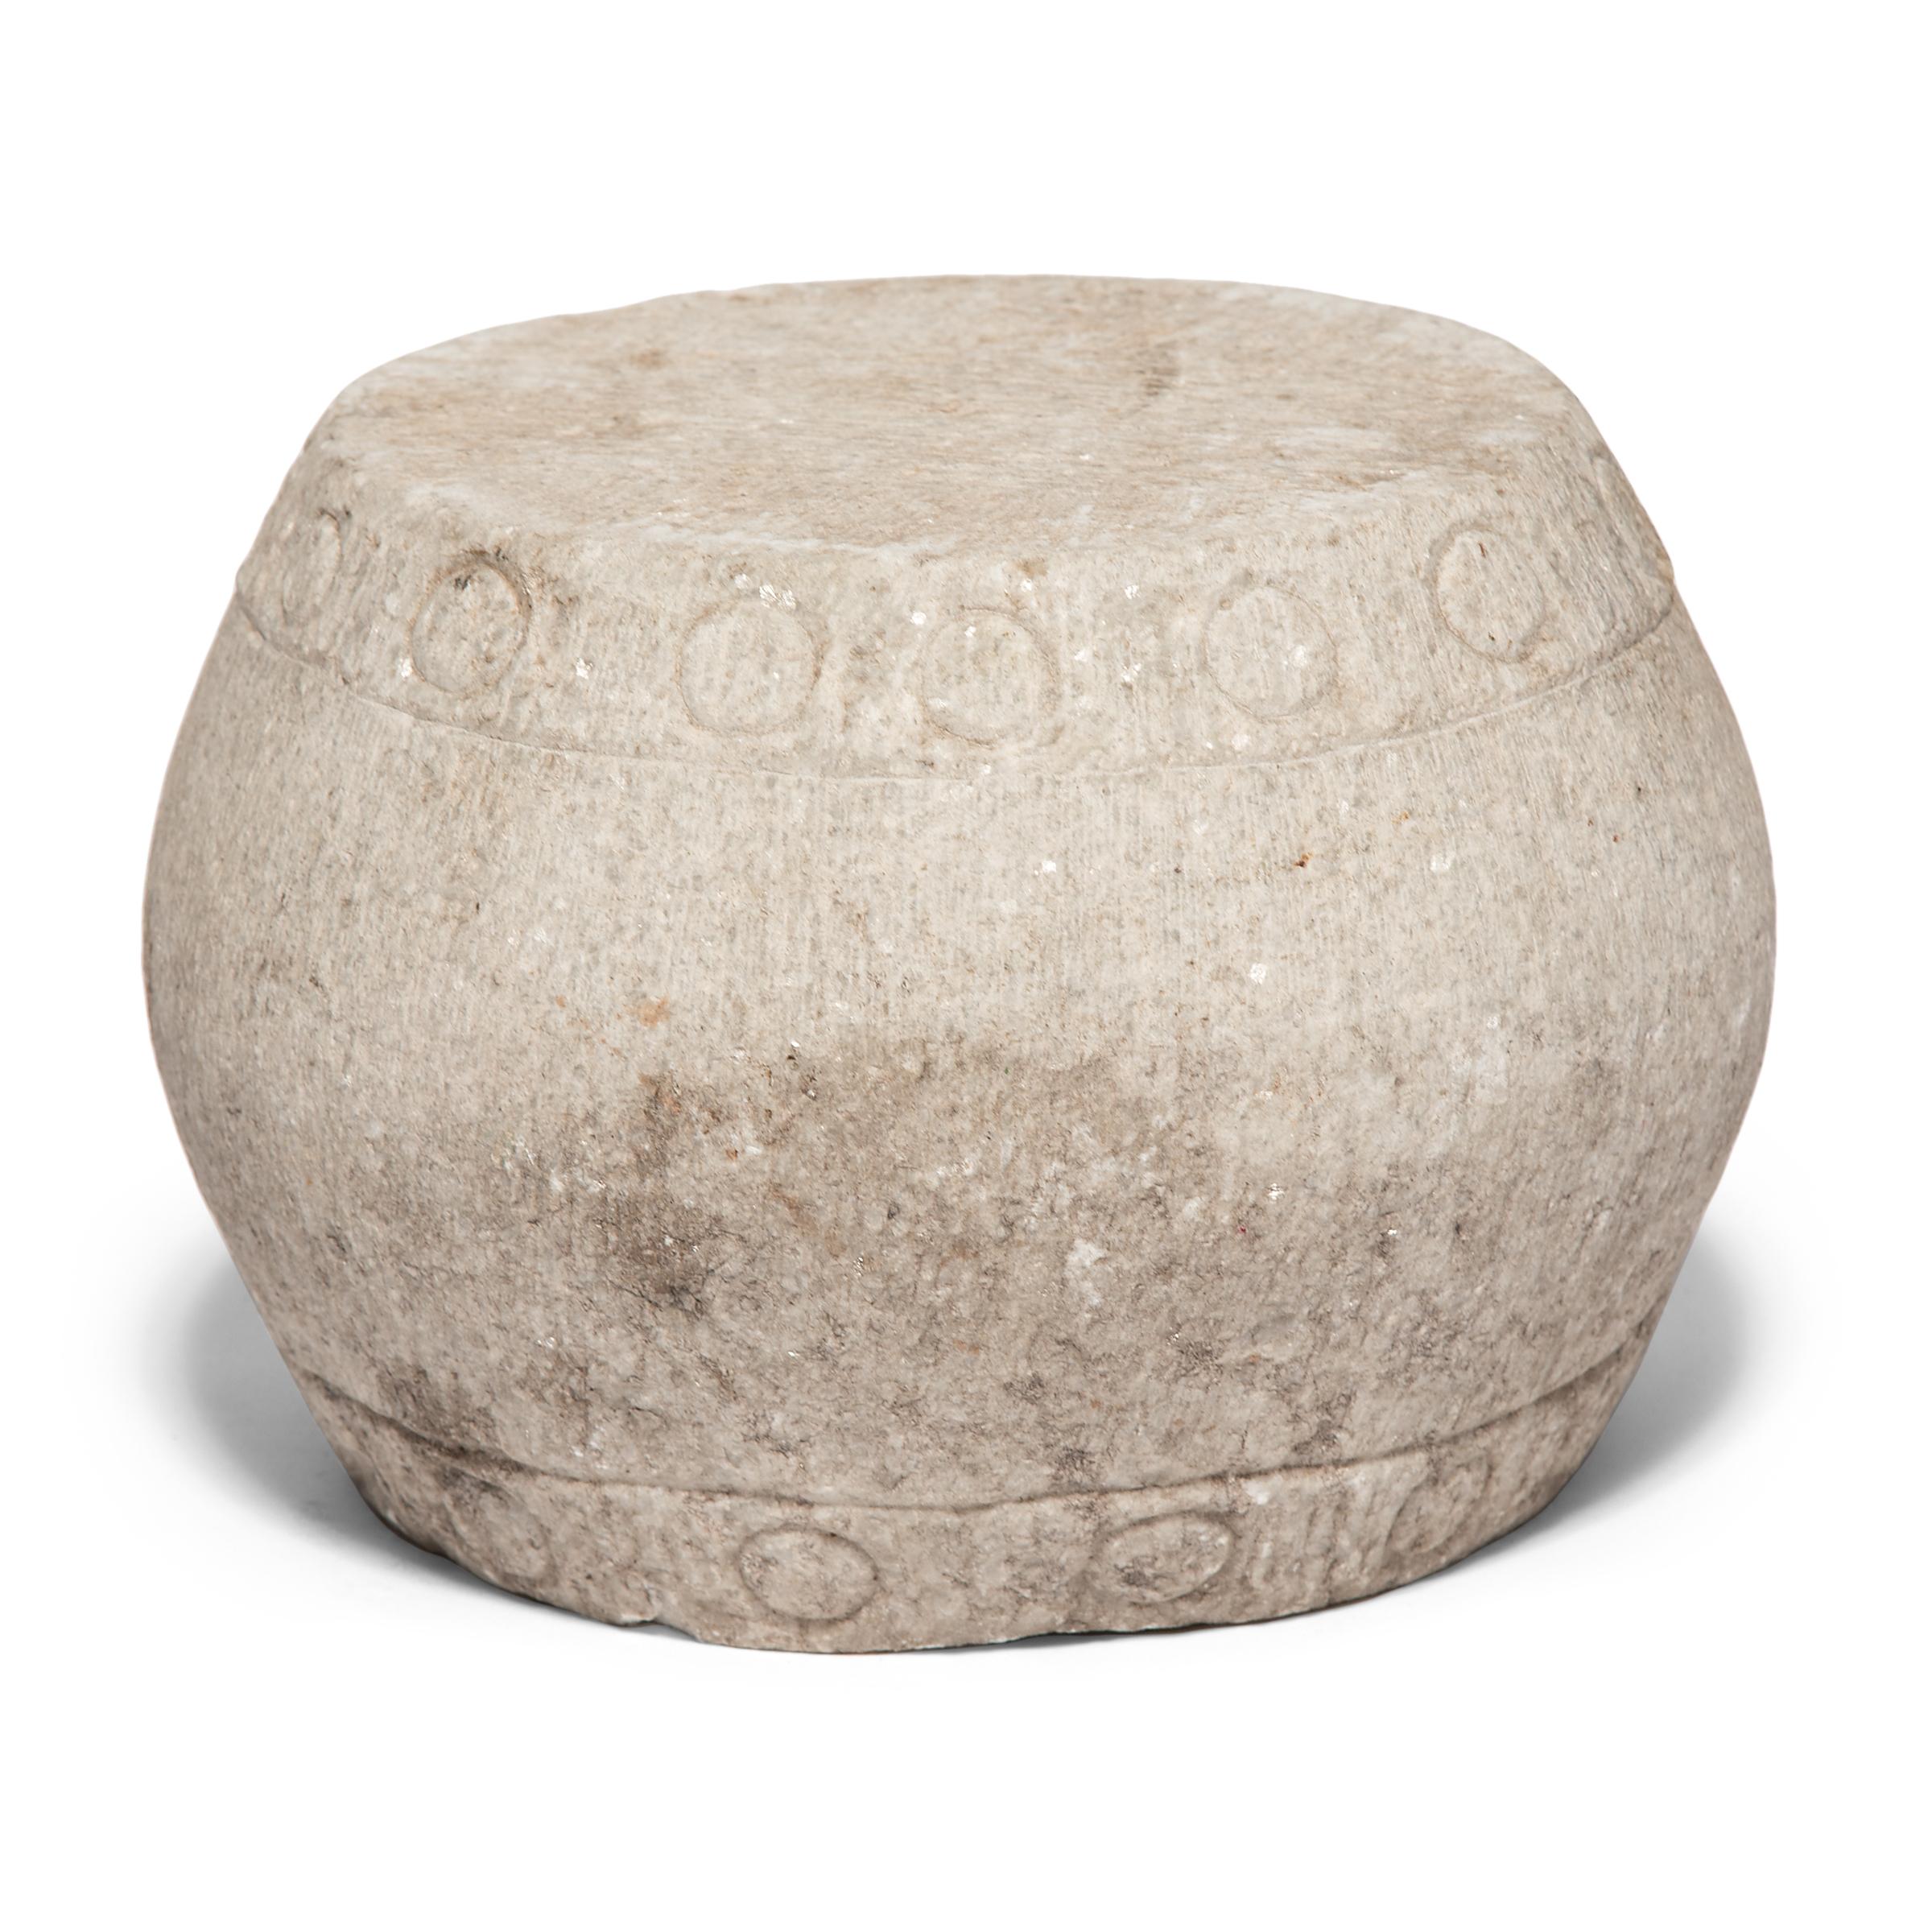 This drum form pedestal was carved from a single block of white marble by Qing dynasty artisans in the mid-19th century. Ringing both its top and bottom, an etched pattern of nailheads imitates those used to stretch a skin on an actual drum. At the